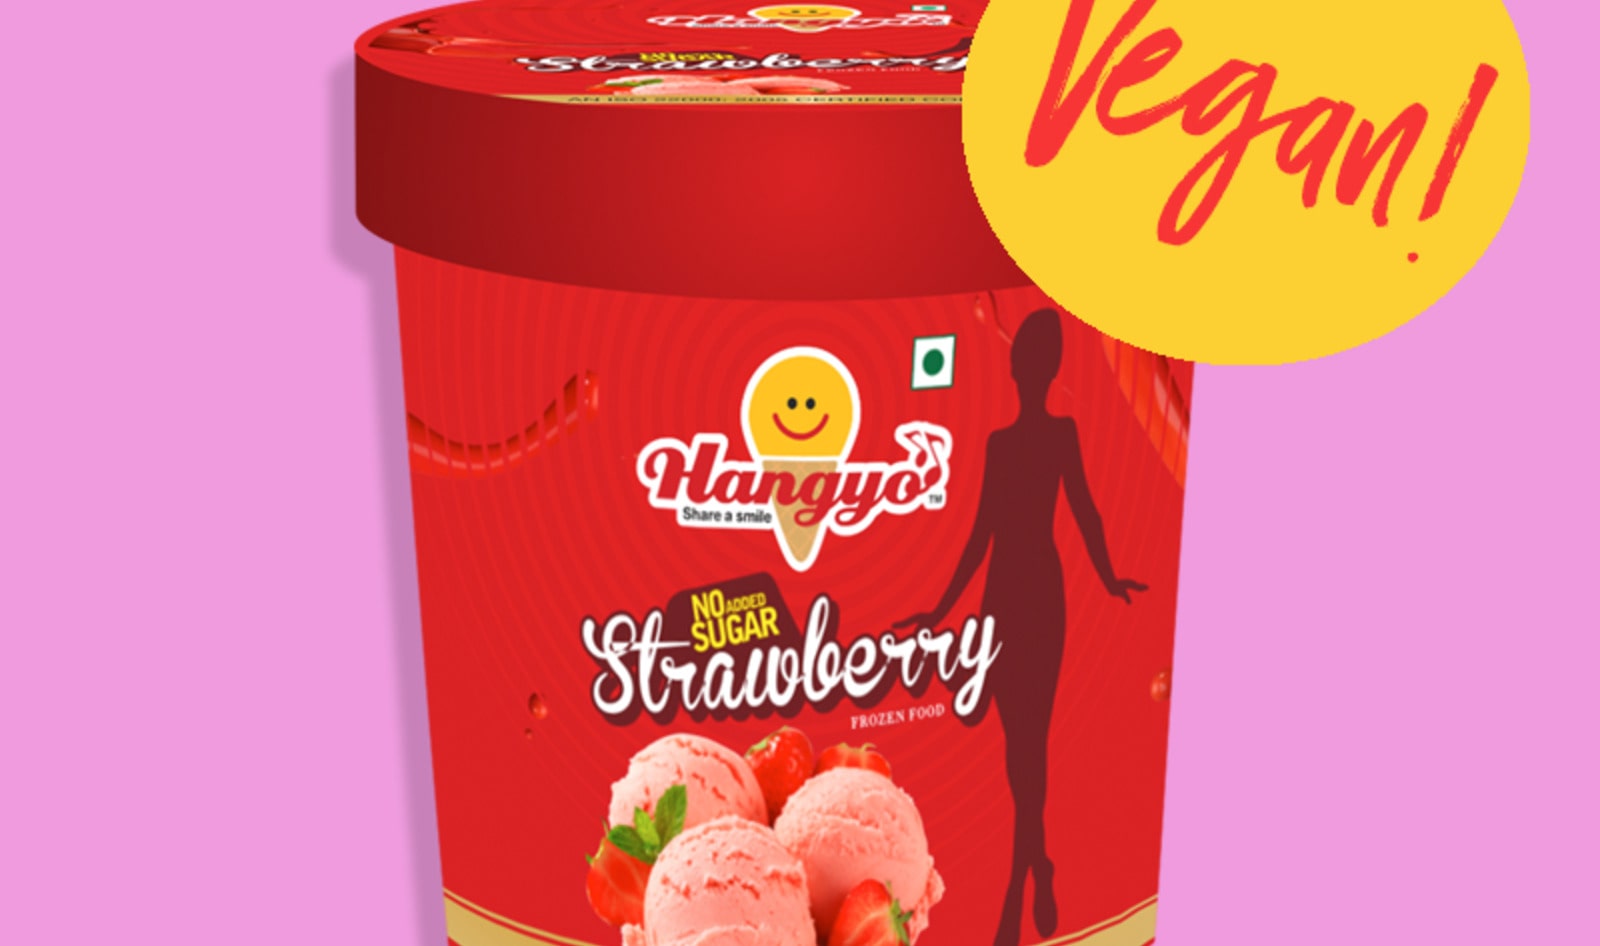 Government-Backed Vegan Ice Cream Launches in India&nbsp;